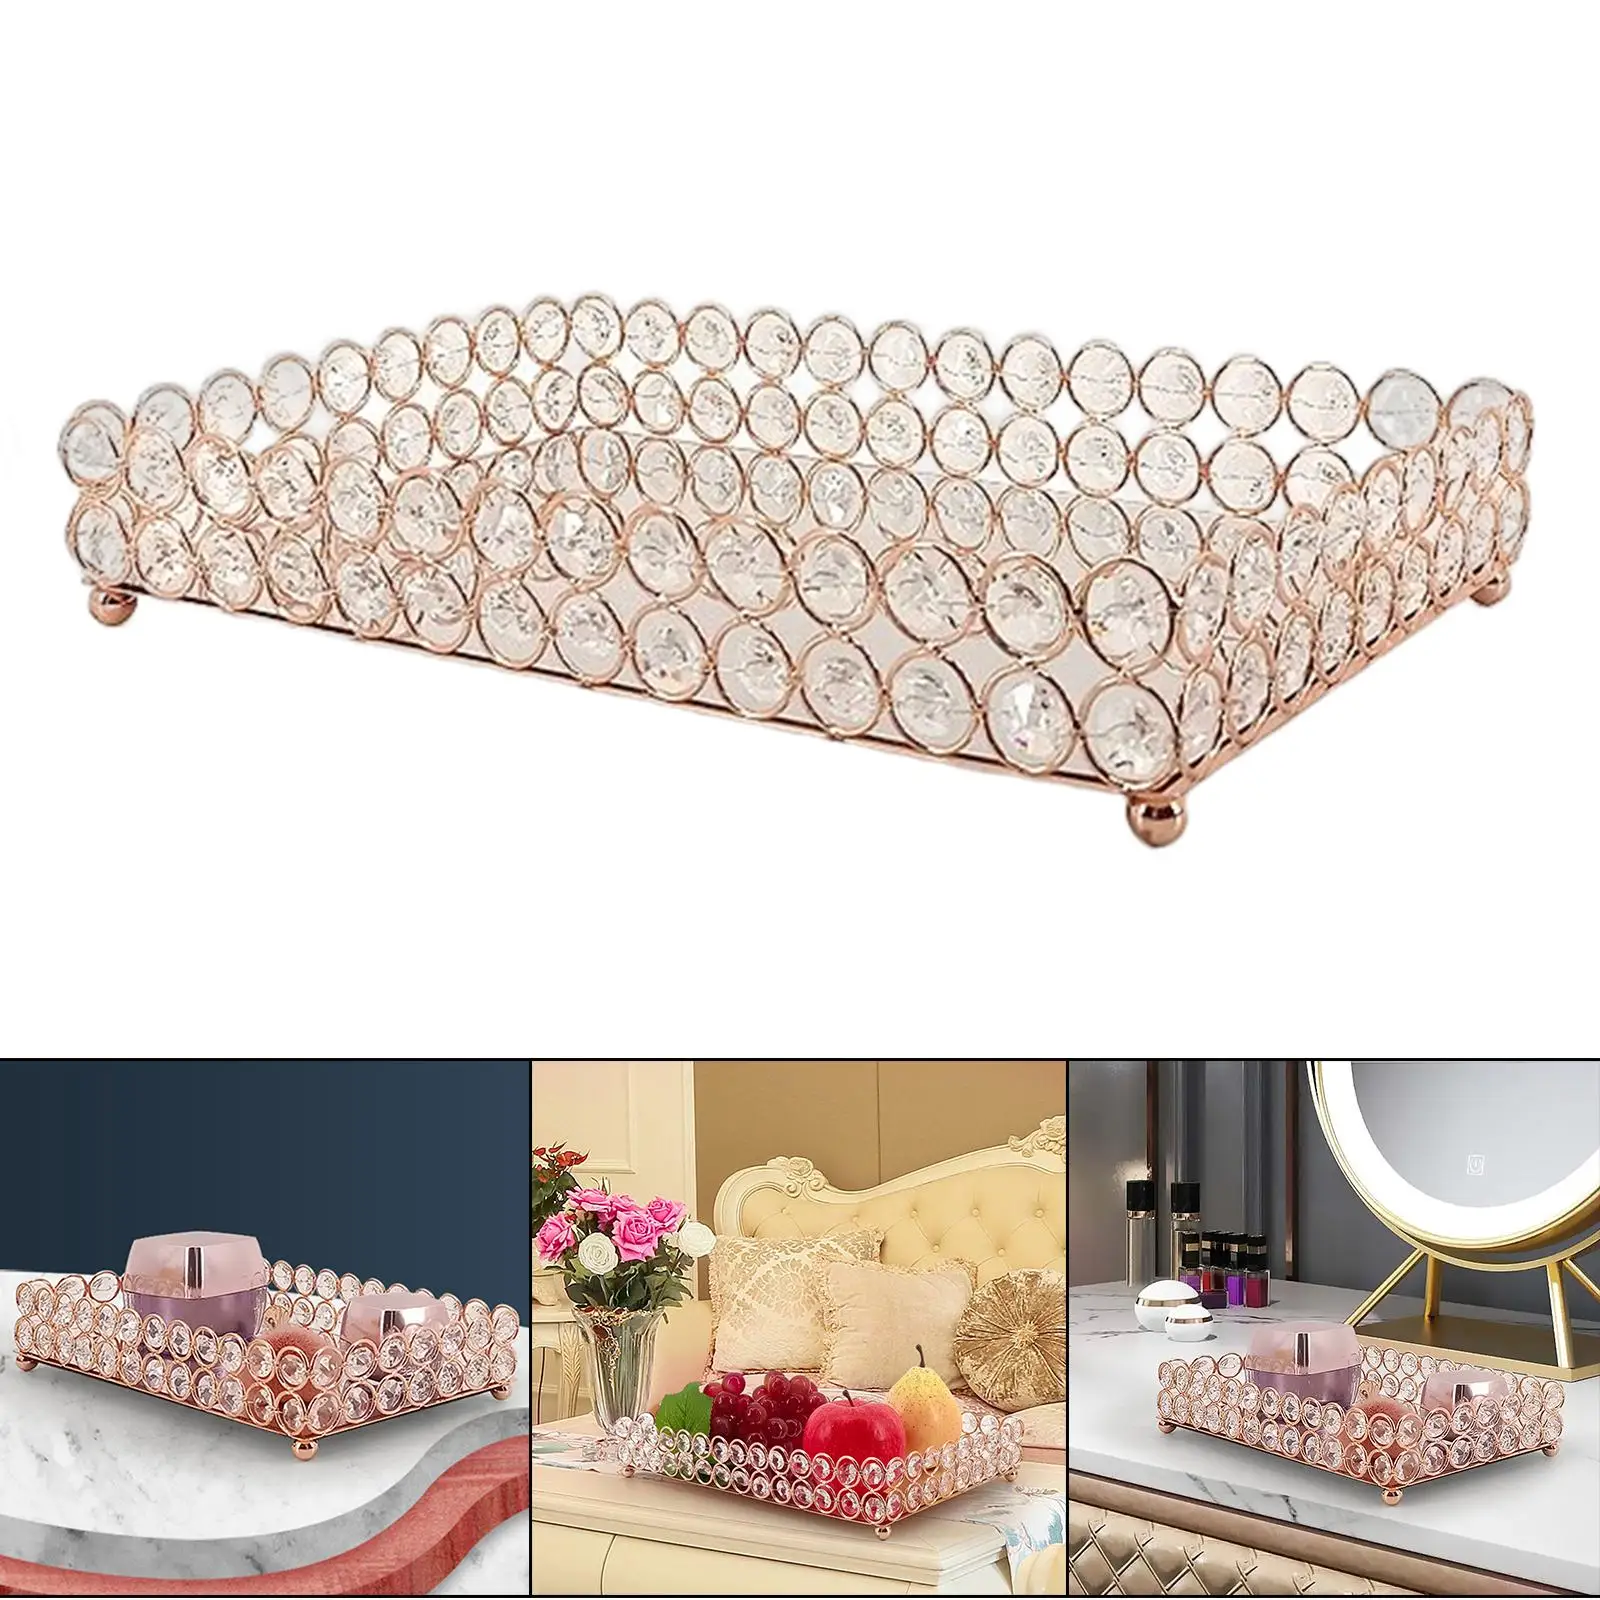 Decorative Mirrored Fruit Tray Panel Desktop Classic Cosmetic Container Display Panel for Wedding Wine Keepsakes Necklace Snacks